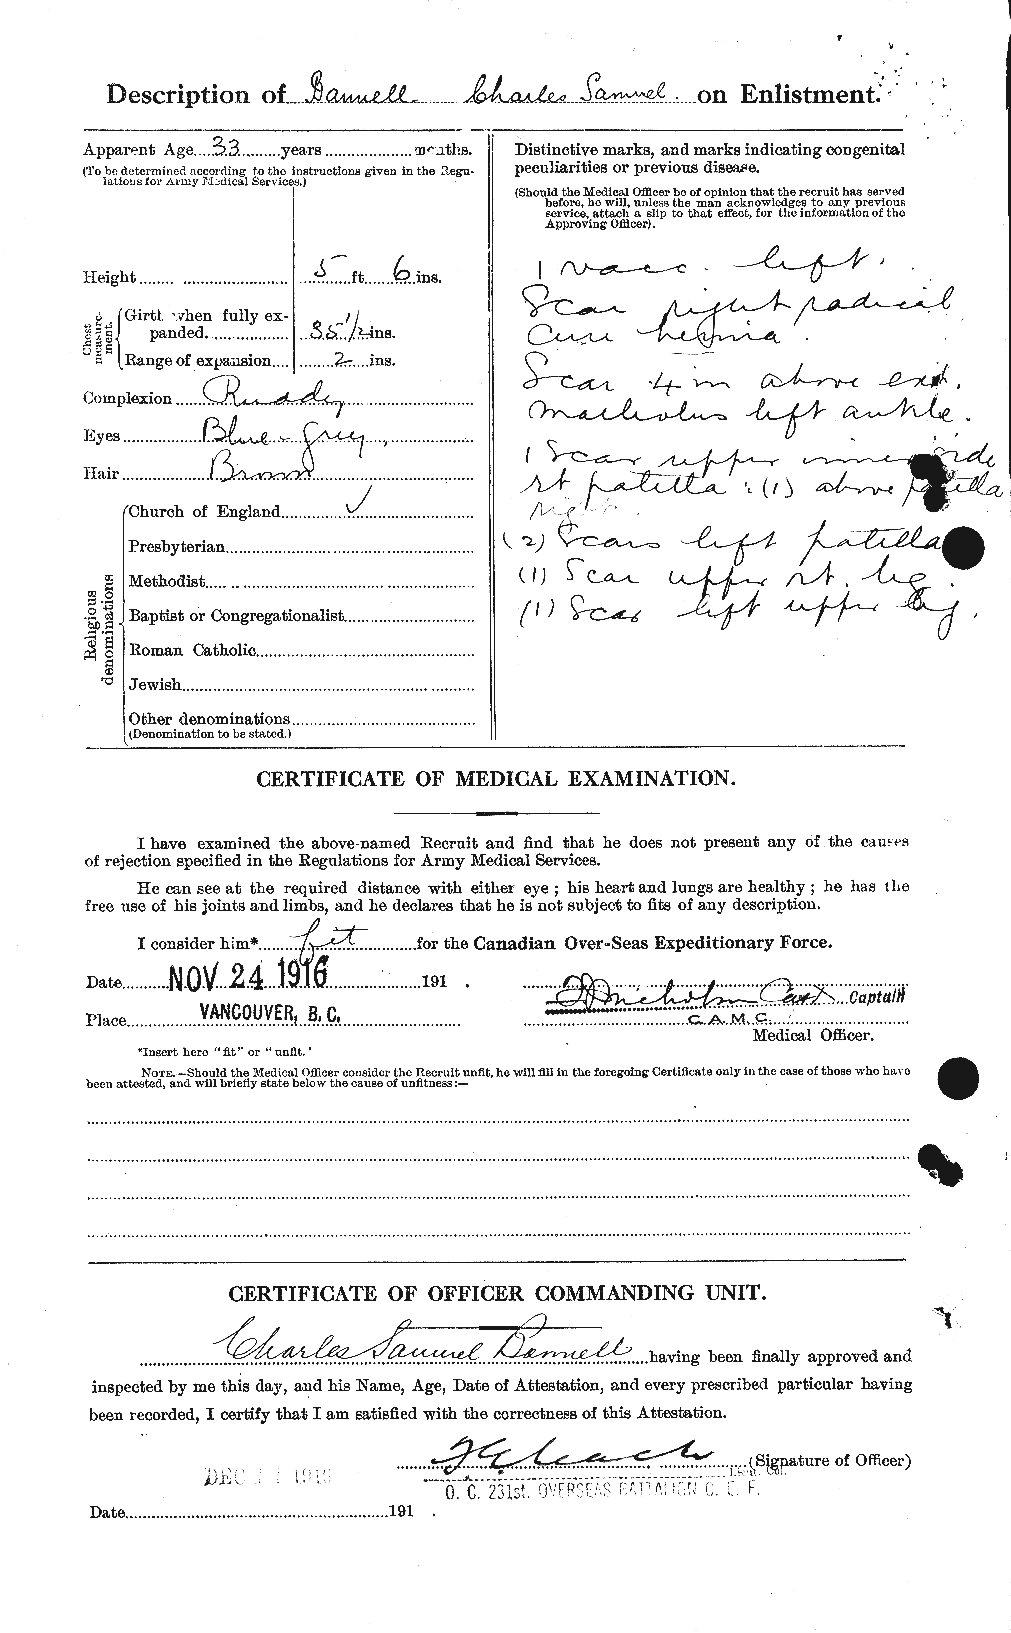 Personnel Records of the First World War - CEF 224891b